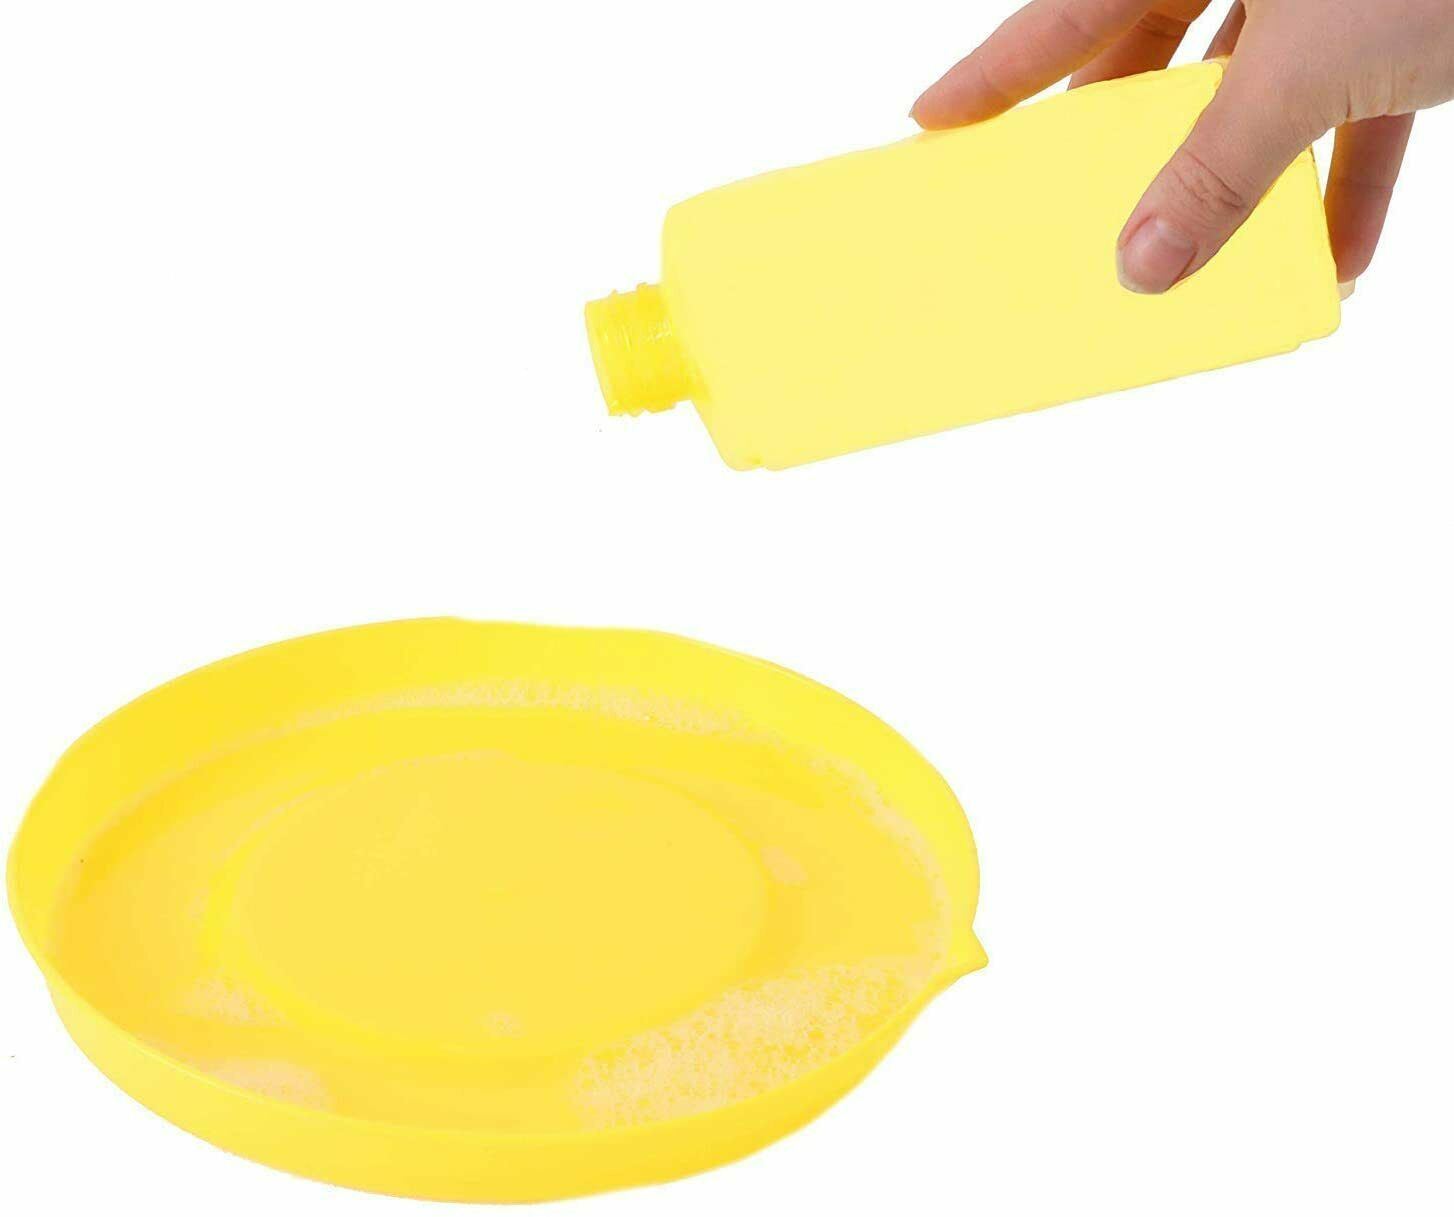 Large Bubble Blowing Kit by The Magic Toy Shop - The Magic Toy Shop